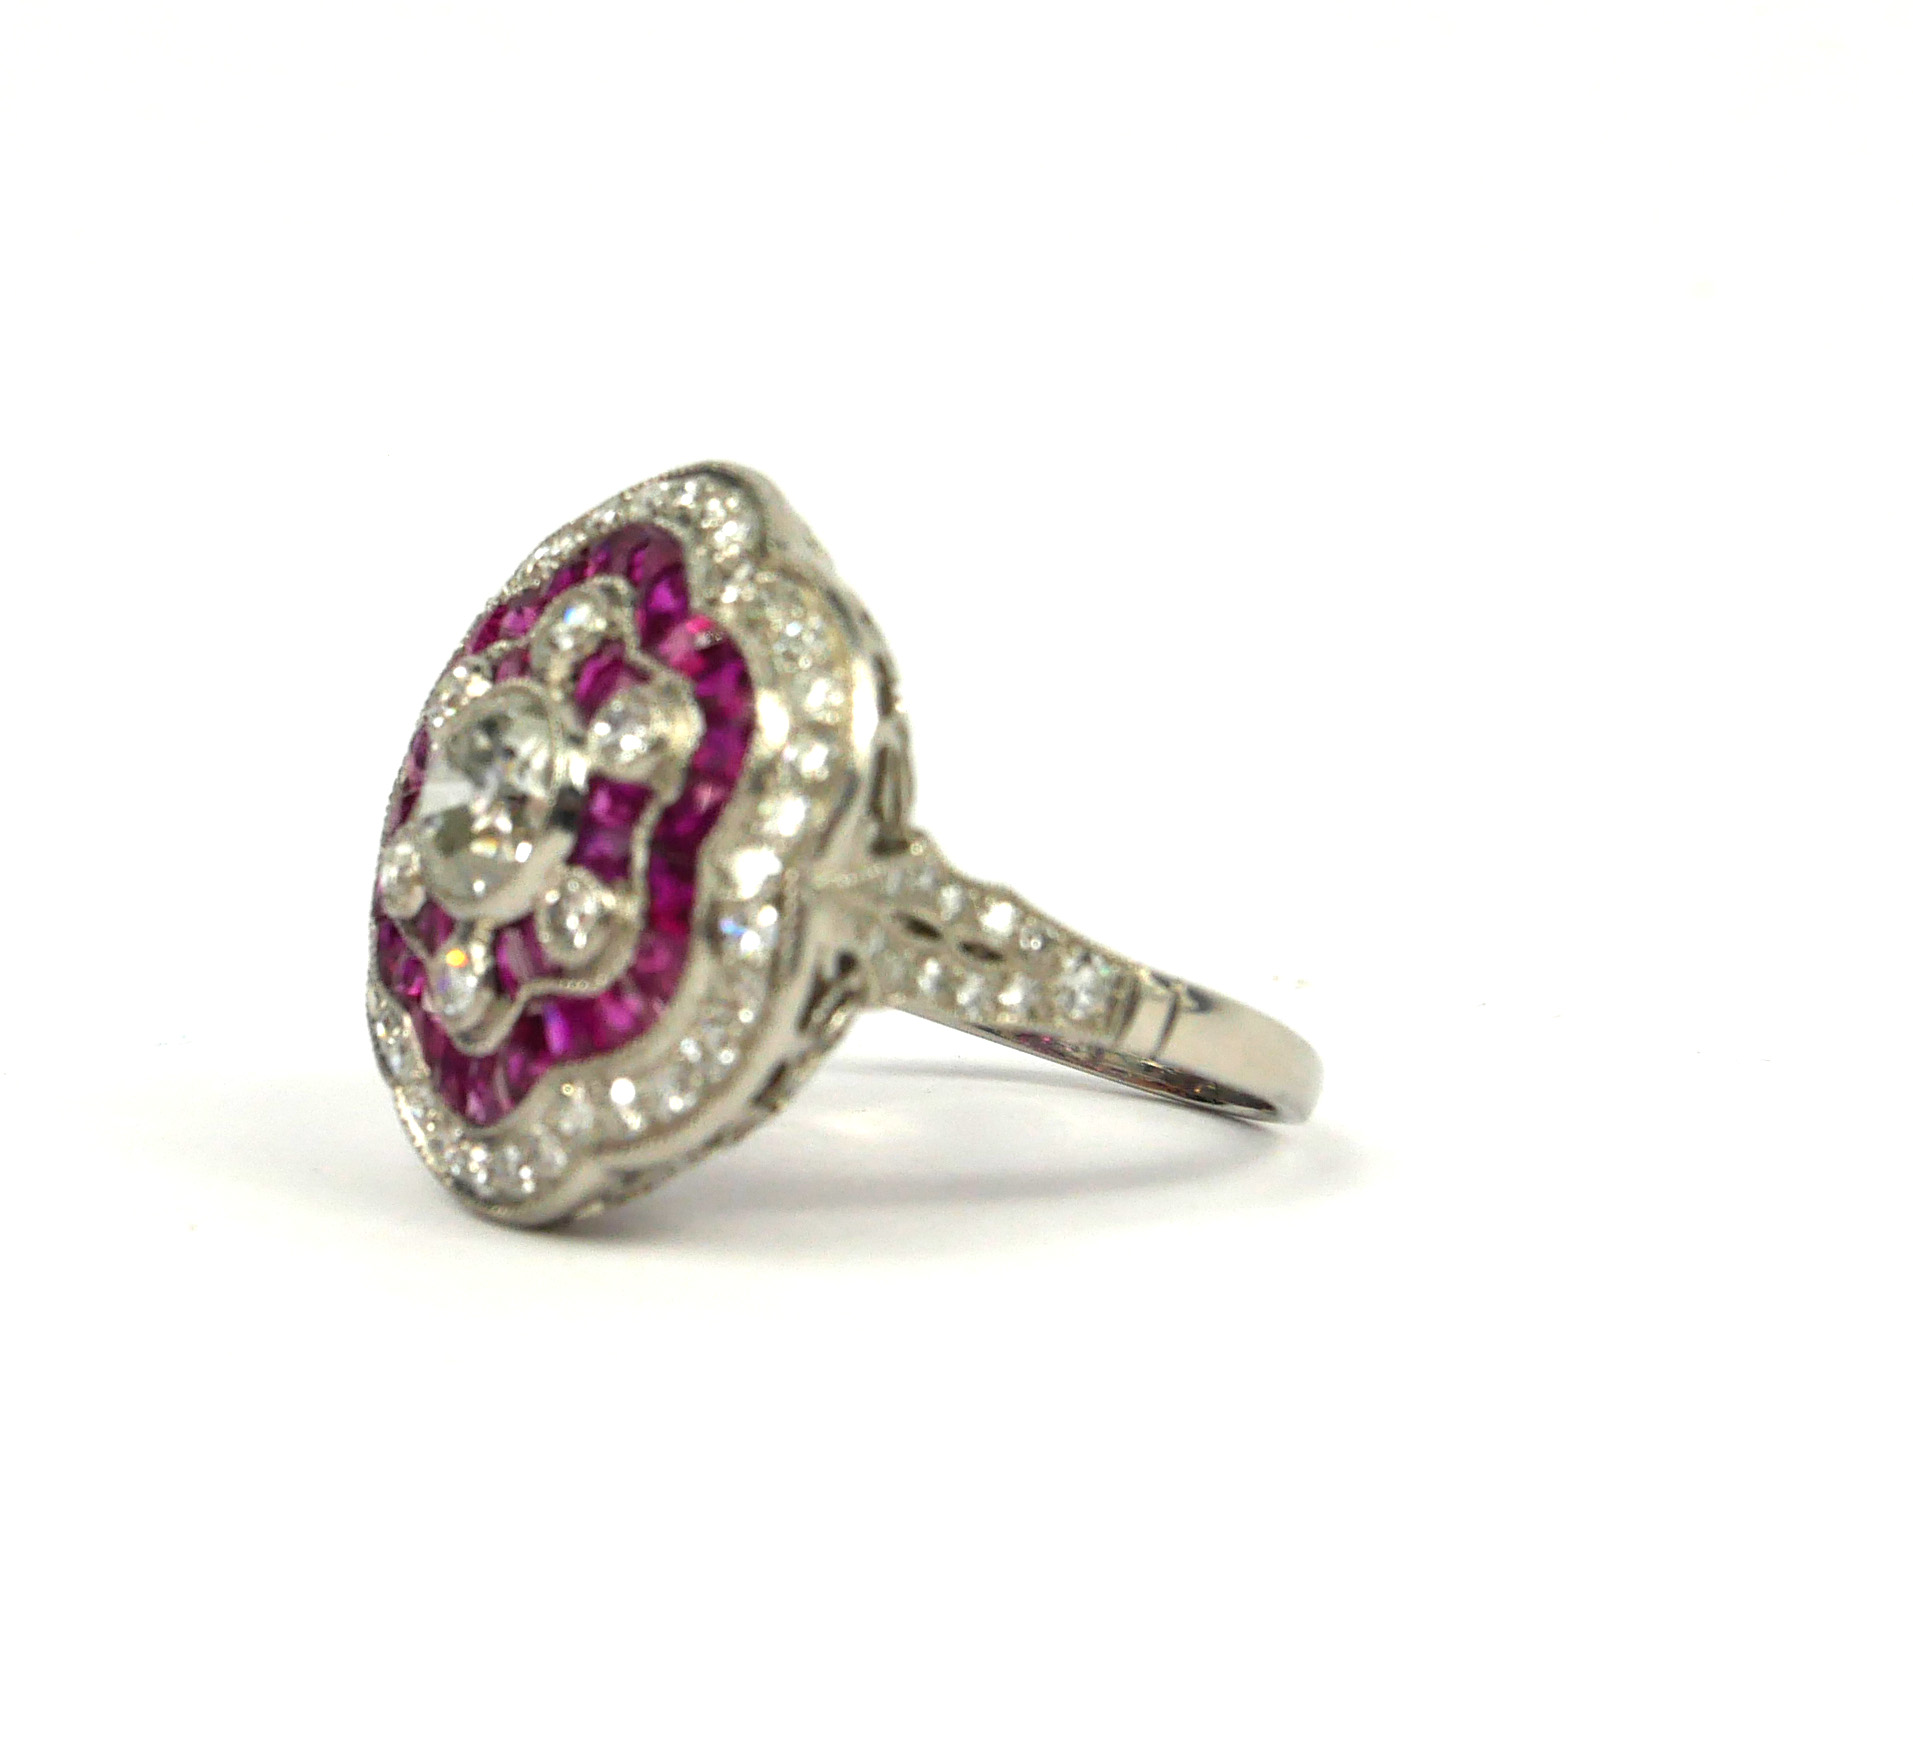 A VICTORIAN STYLE RUBY AND DIAMOND CLUSTER RING. (Approx 1.75ct diamonds, 1.45ct rubies) - Image 2 of 3